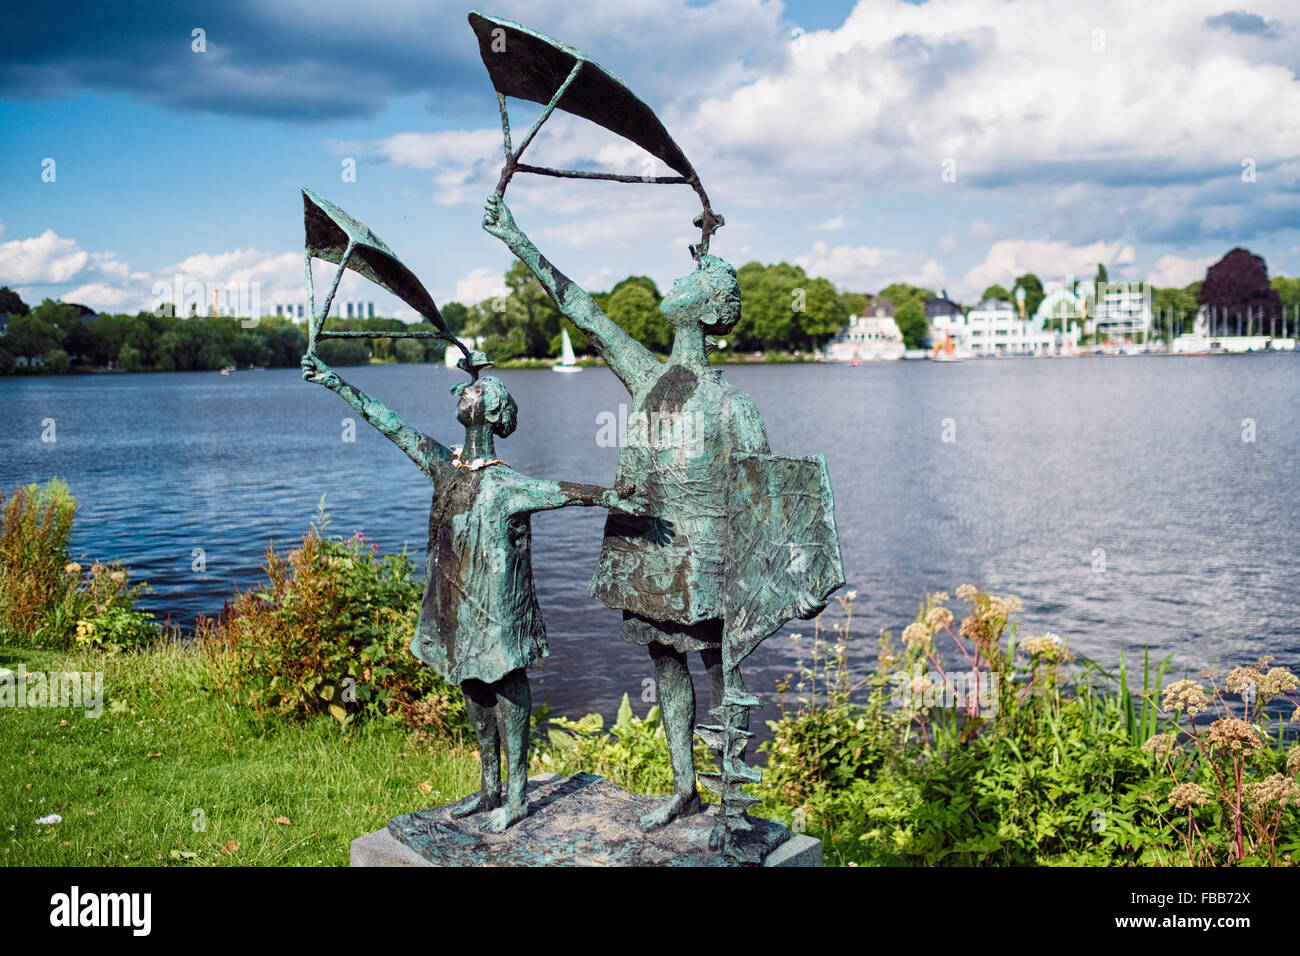 Sculpture of Two Children with Kites along Alster Lake, Hamburg, Germany Stock Photo